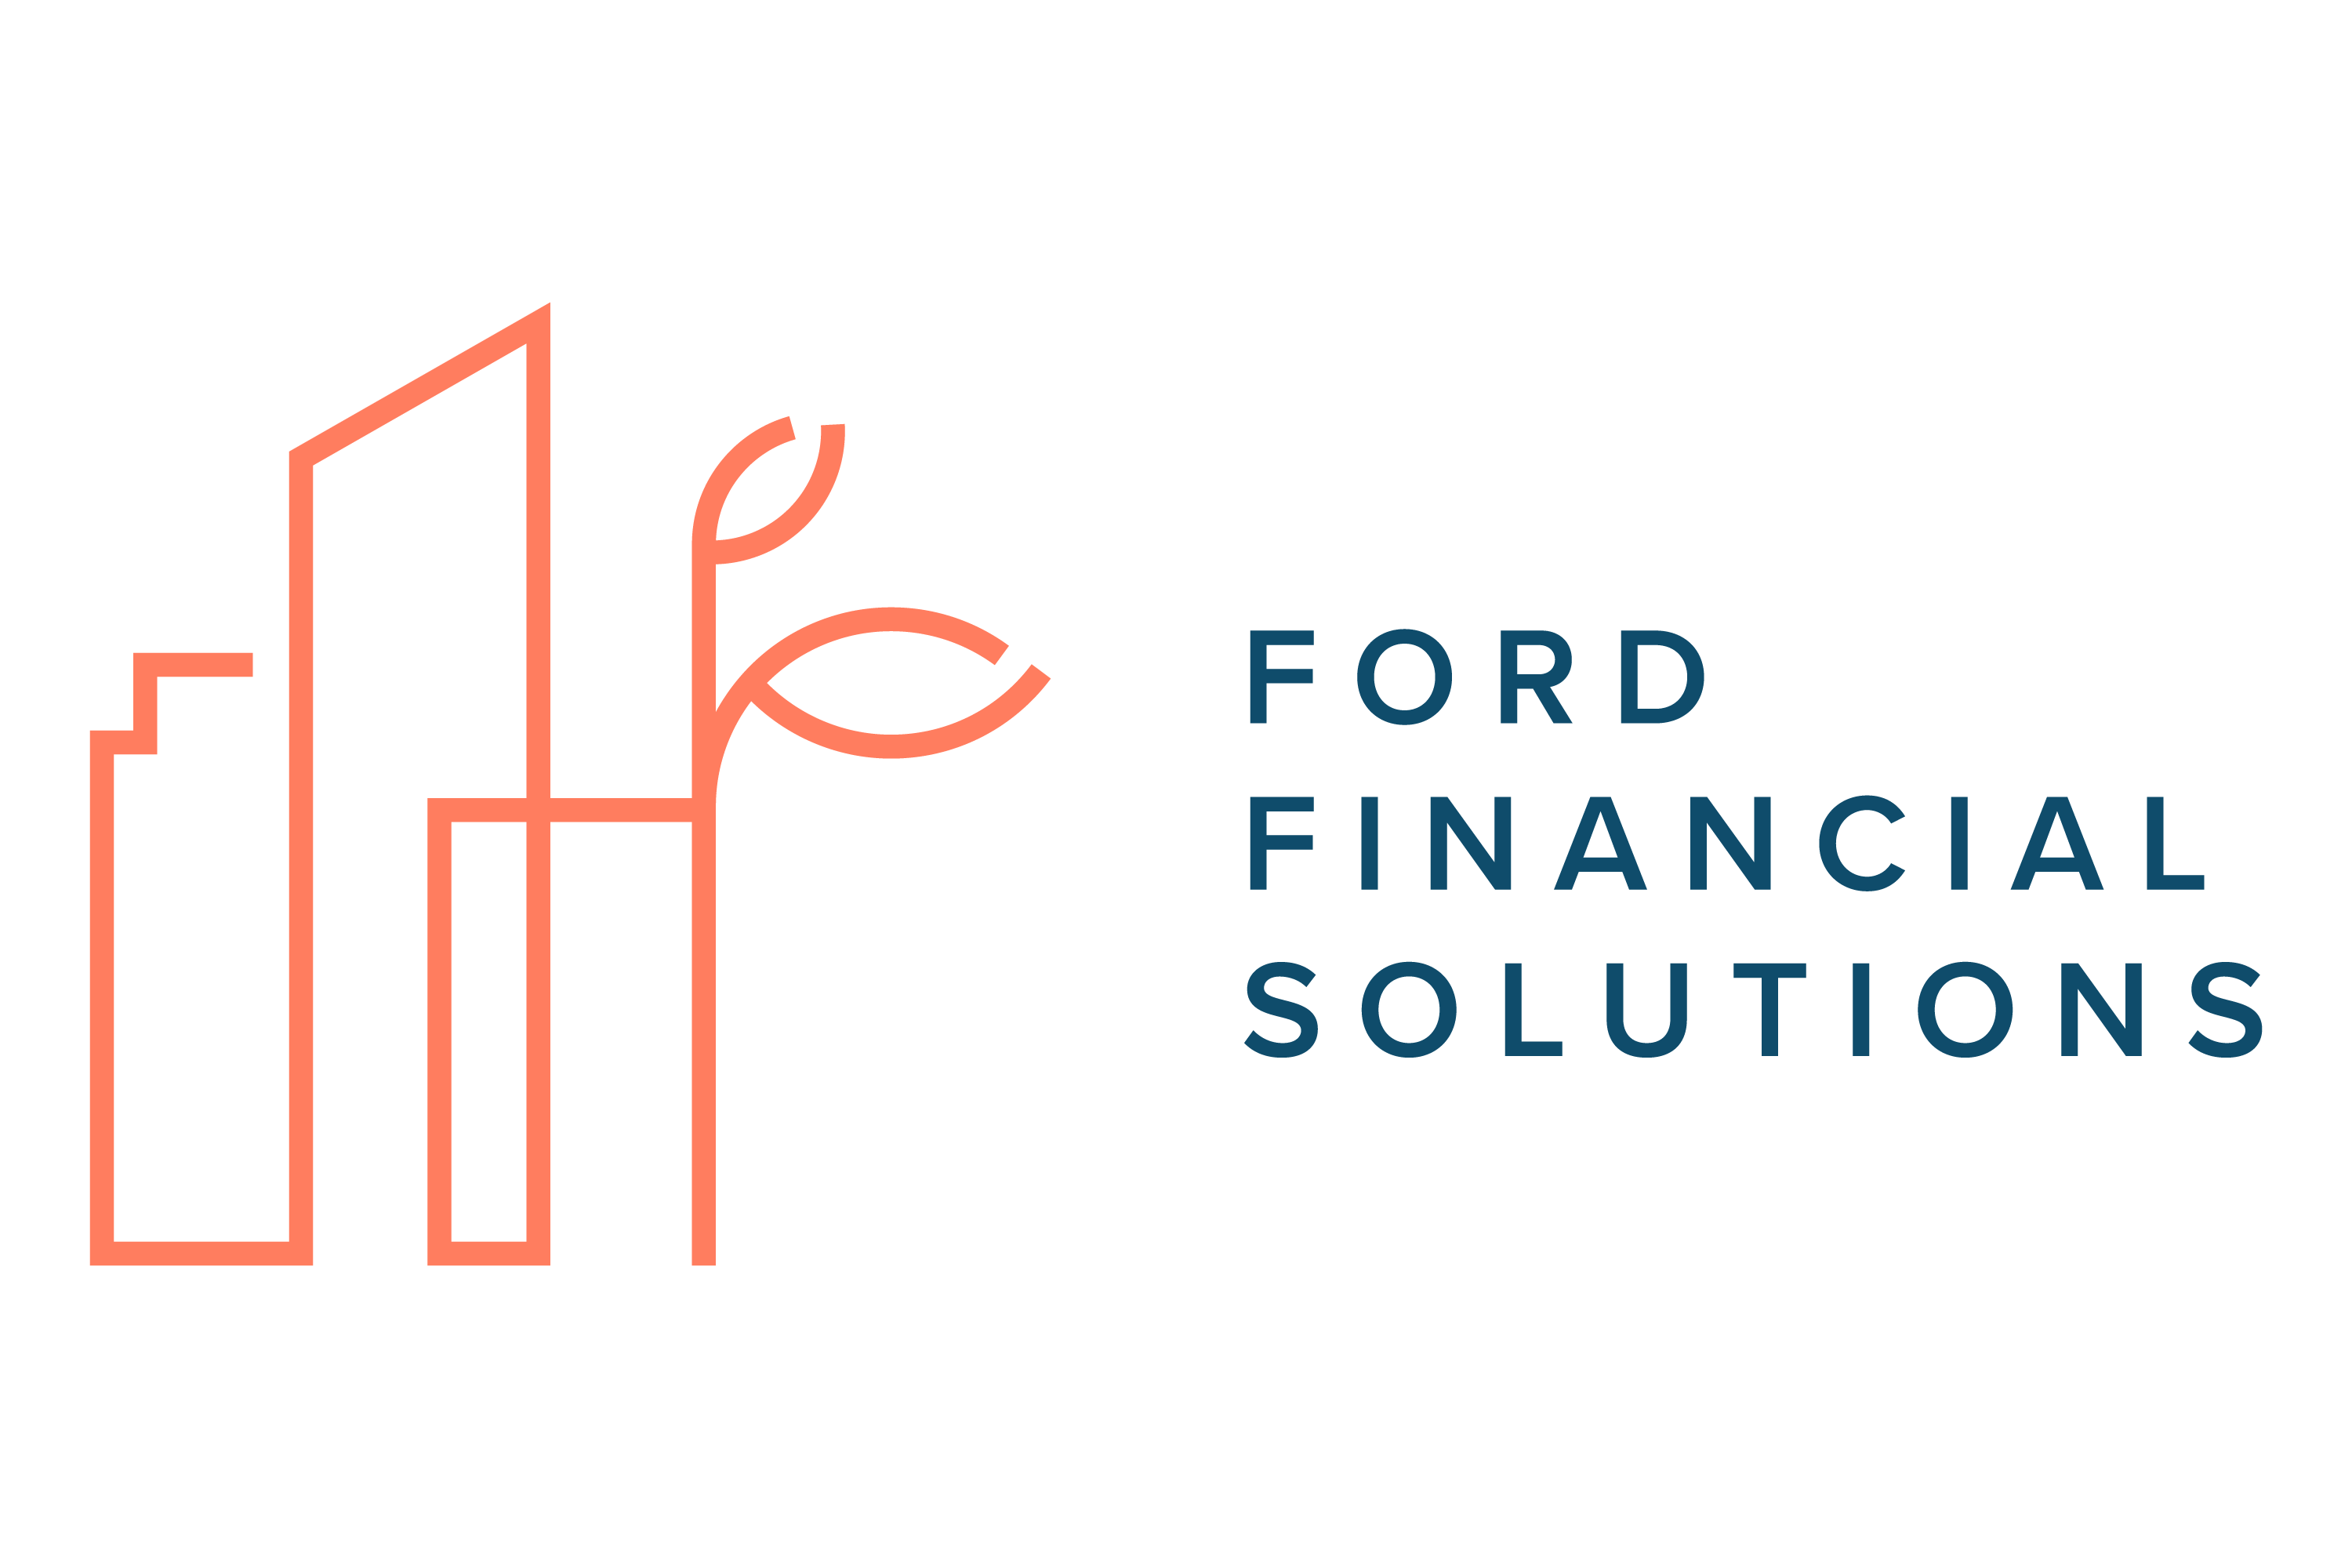 Ford Financial Solutions